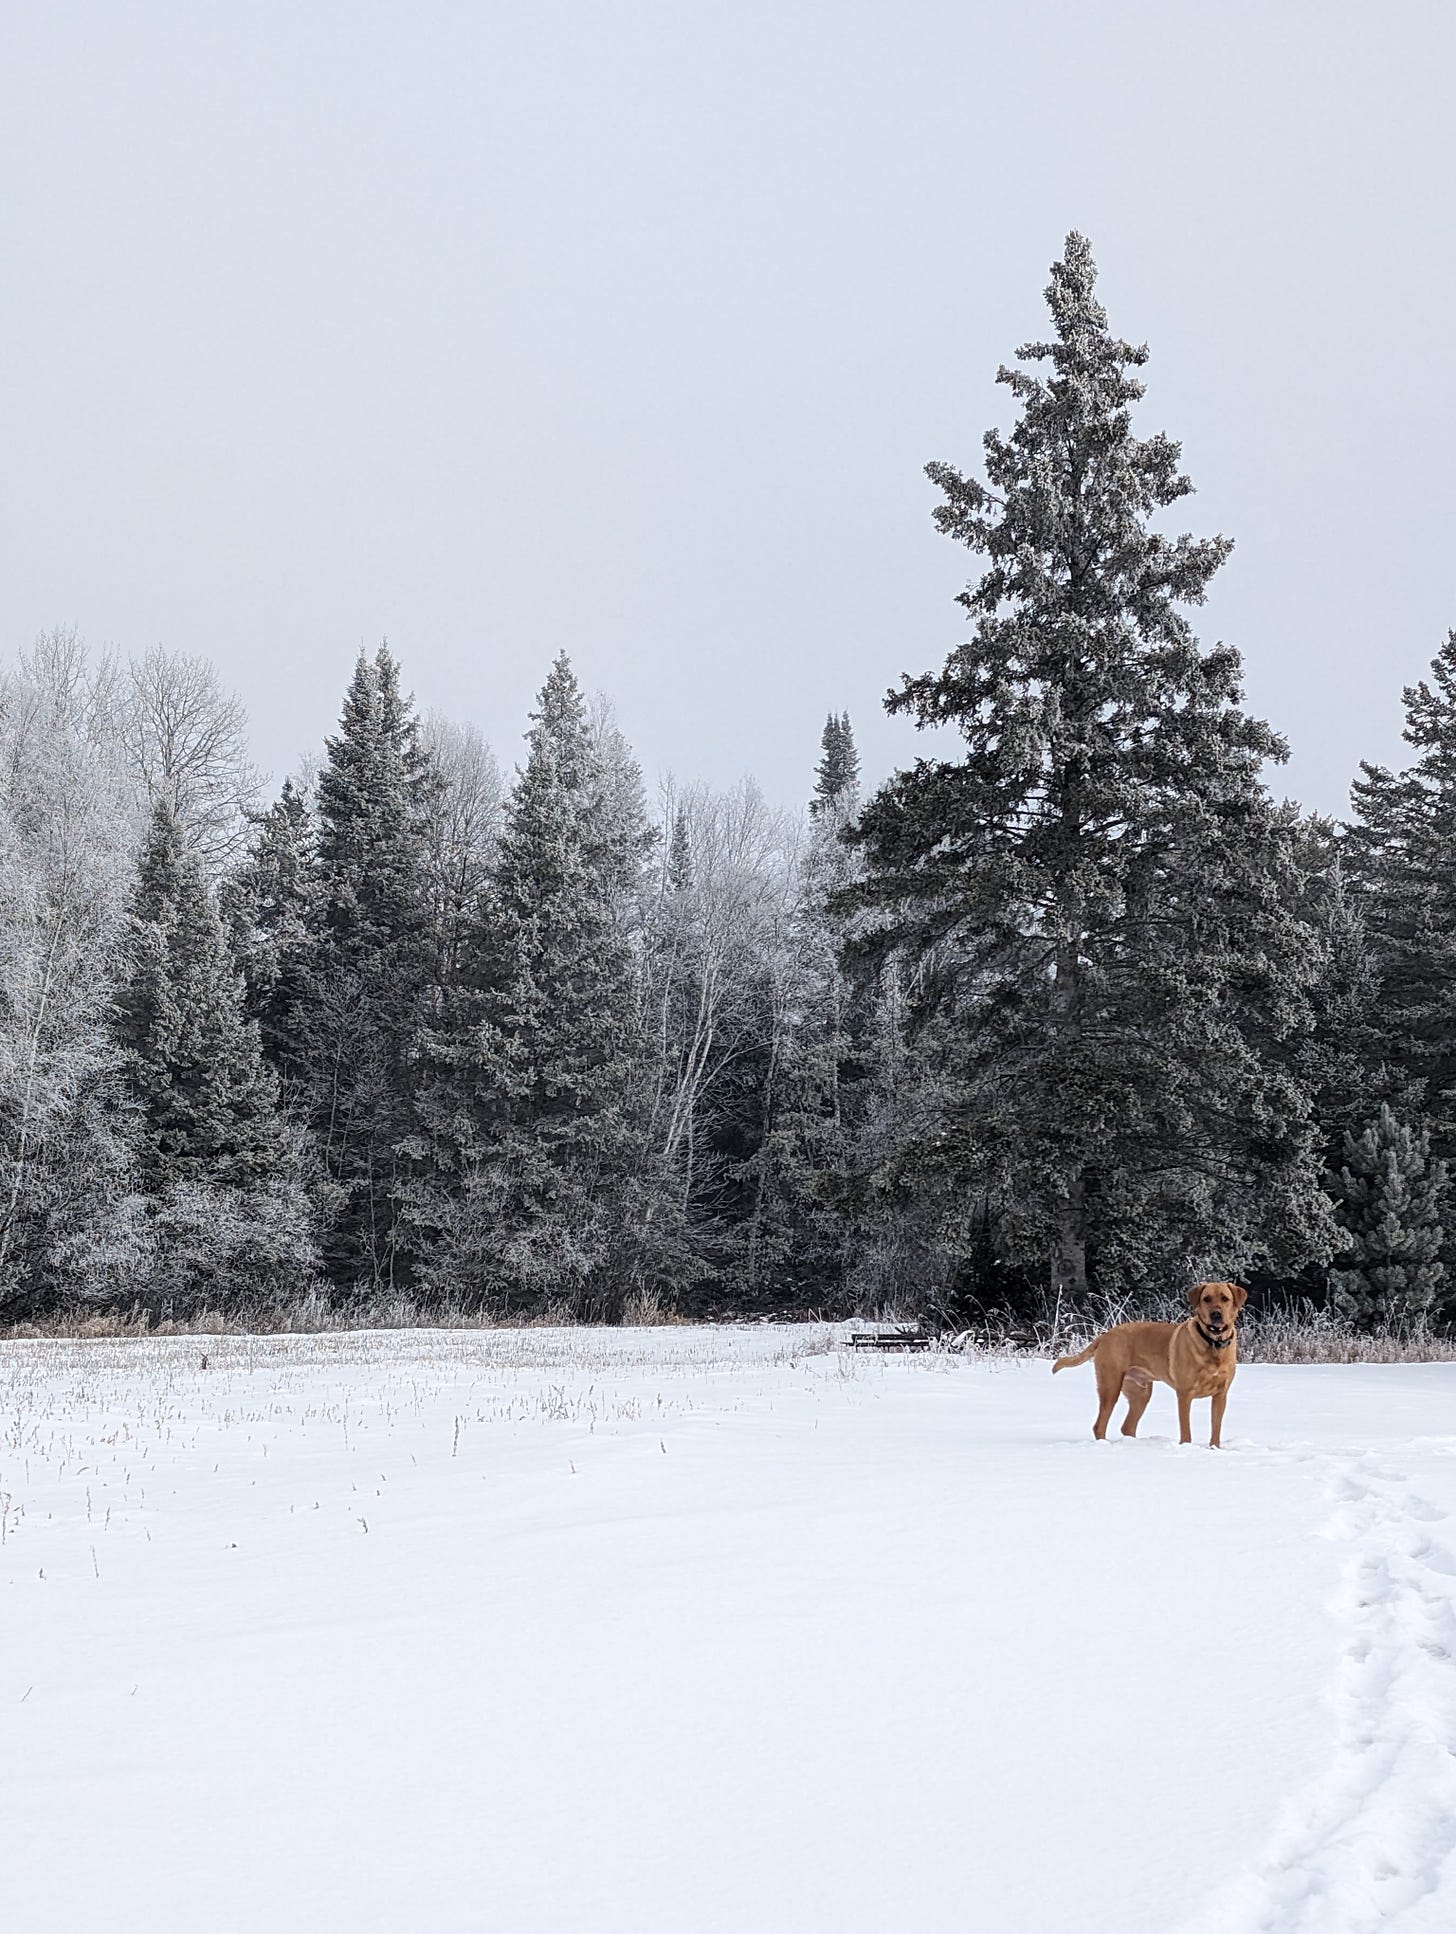 A winter treeline showing hoarfrost on the trees with a red lab in the snow before the trees.